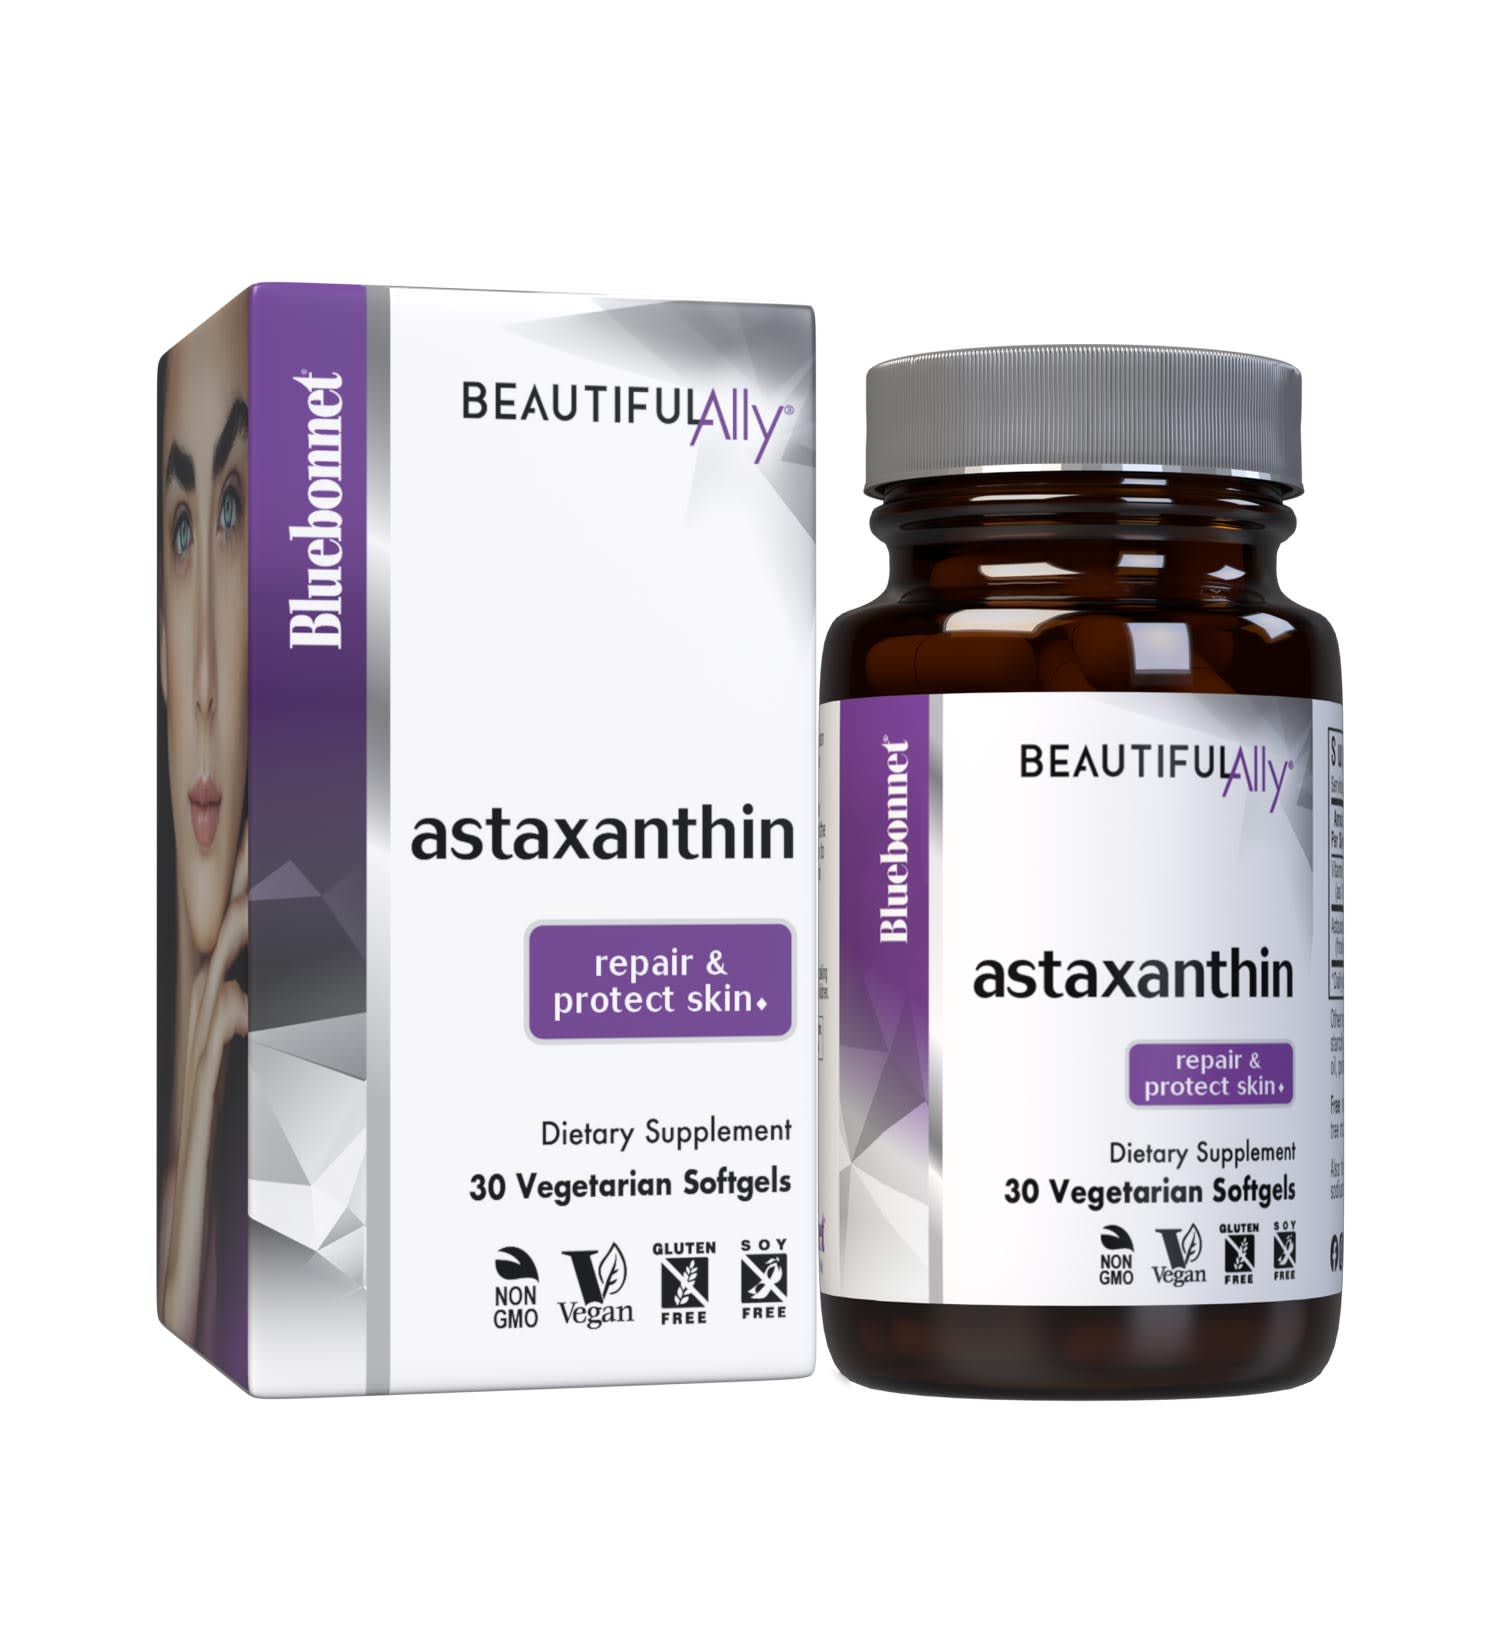 Bluebonnet’s Beautiful Ally Astaxanthin 30 Vegetarian Softgels are specially formulated to help repair and protect the skin from UV-induced oxidative stress that contributes to skin damage and aging with a vegan-based astaxanthin sustainably-sourced from marine algae. With box. #size_30 count